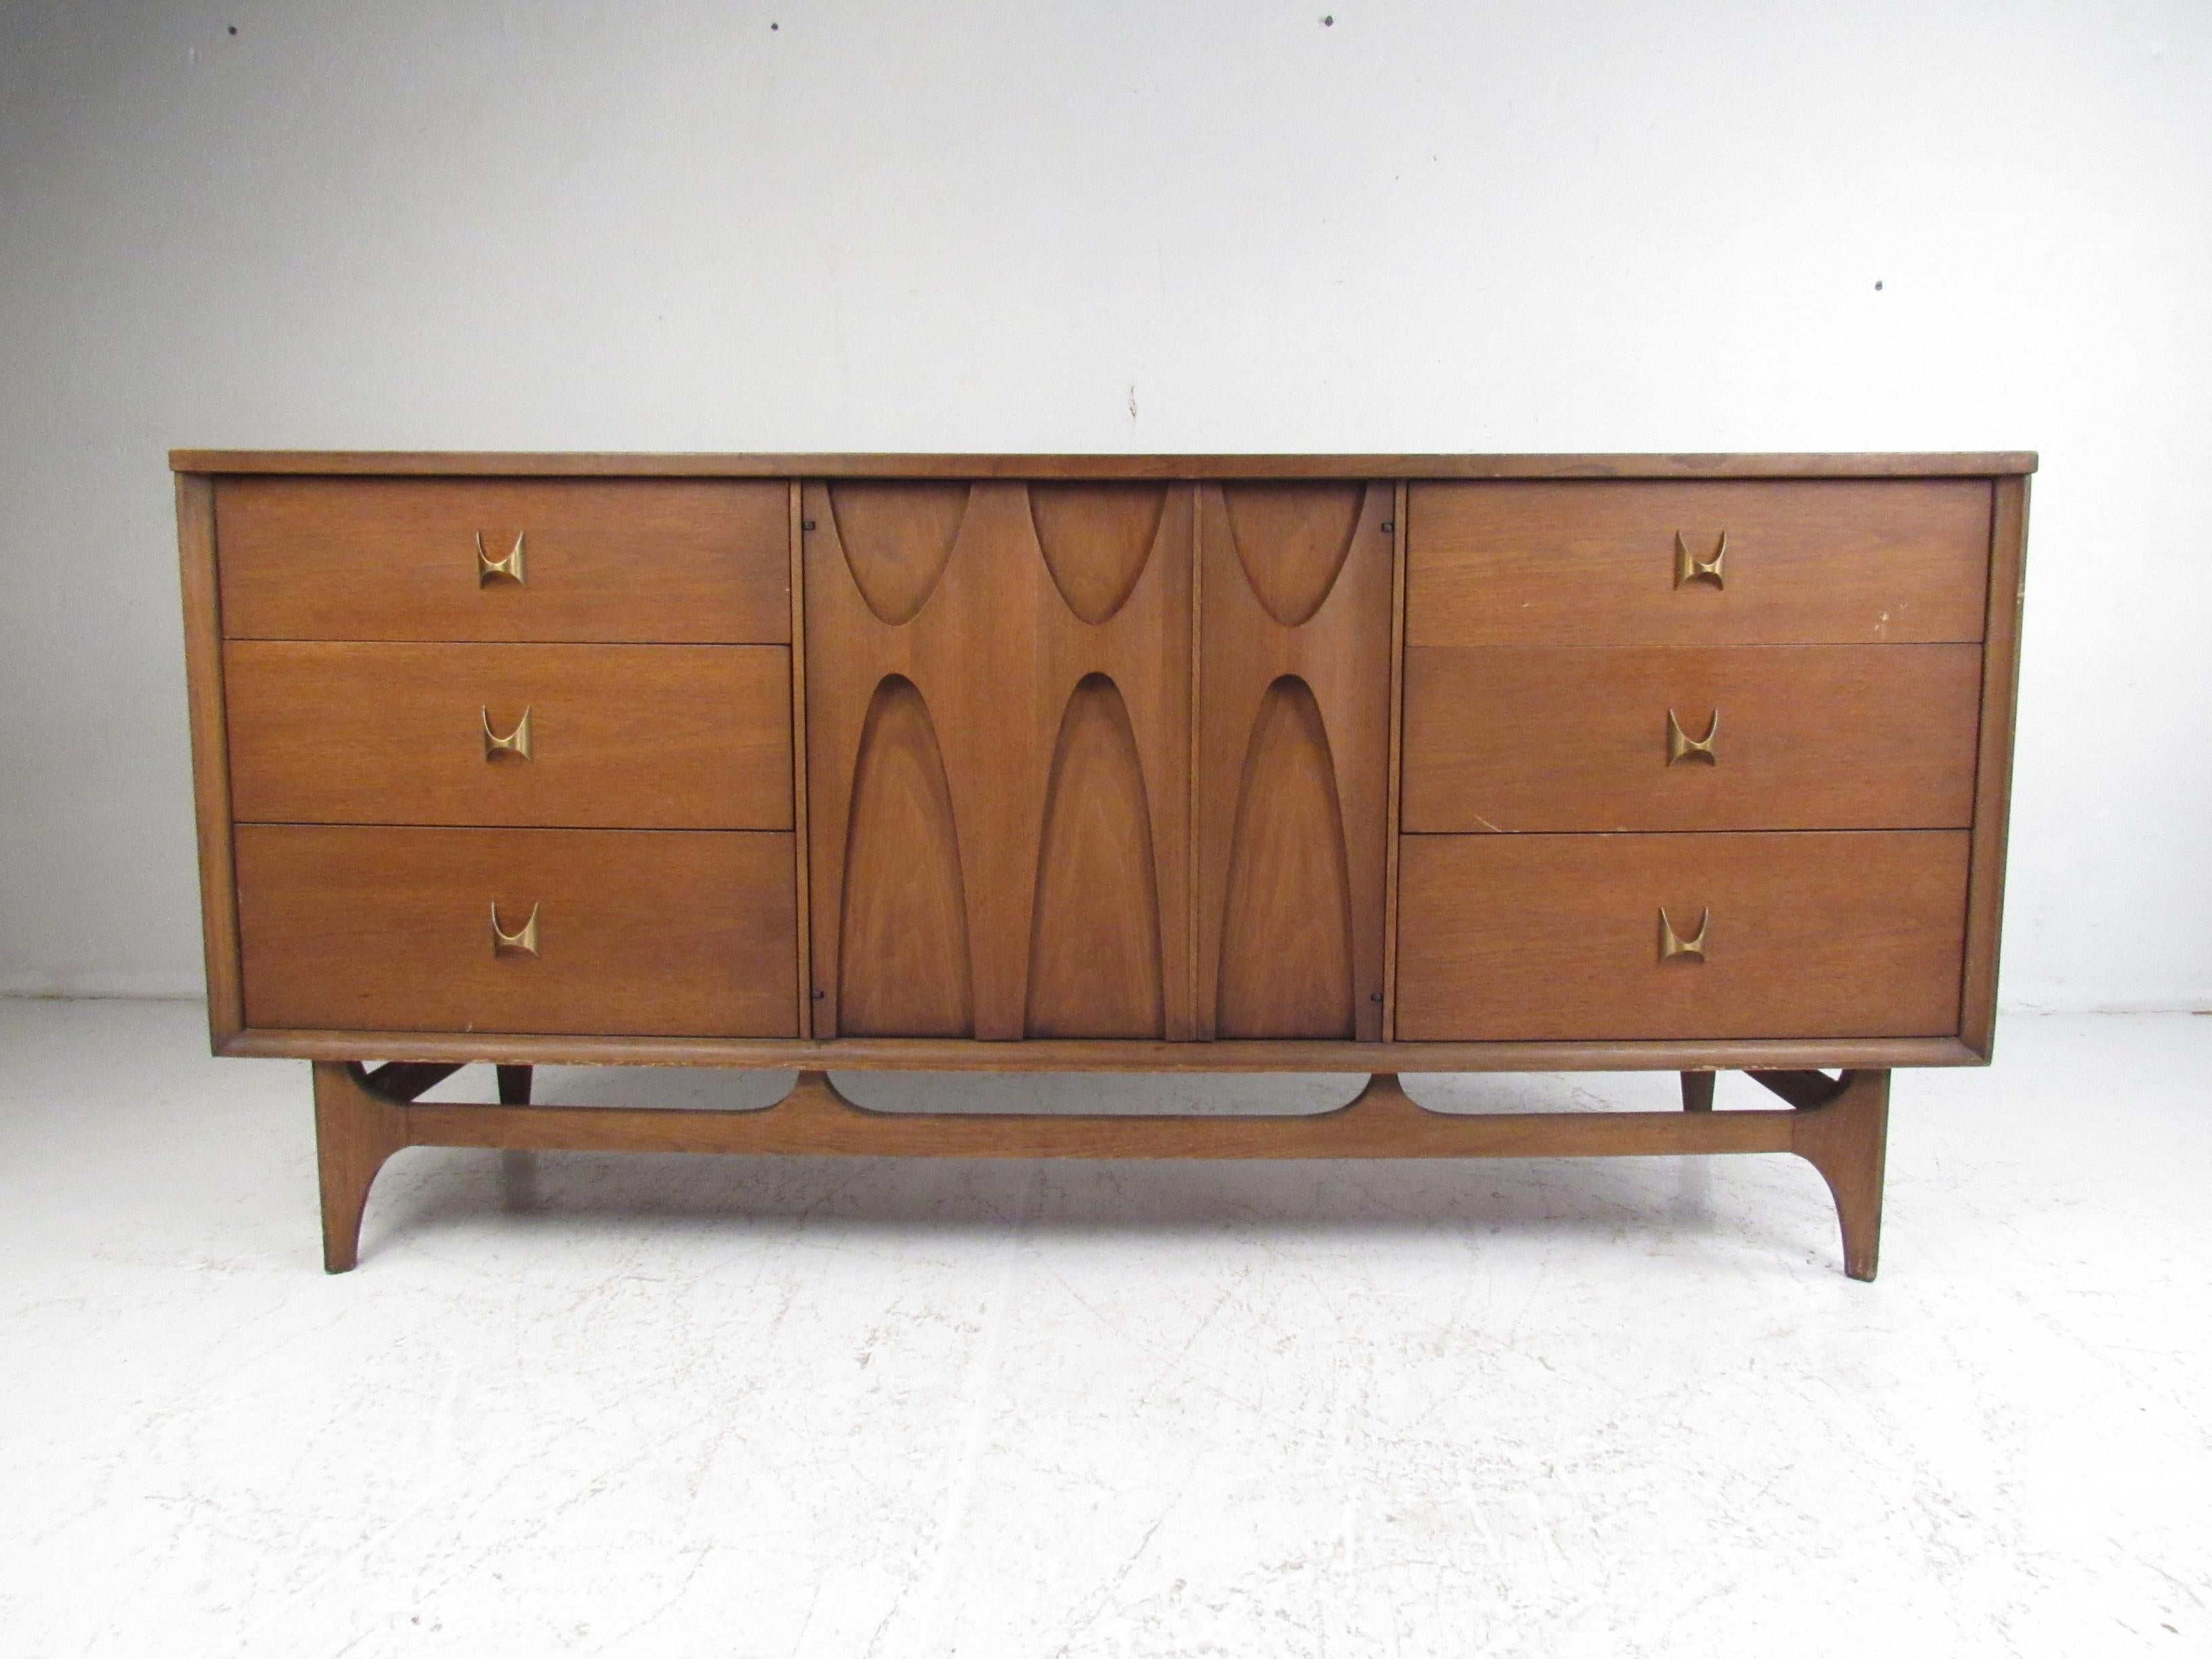 A beautiful vintage modern dresser by Broyhill Brasilia with nine hefty drawers. This stylish case piece boasts the iconic Brutalist cabinet door pulls and sculpted brass drawer pulls that Broyhill is known for. A sleek design with a vintage walnut